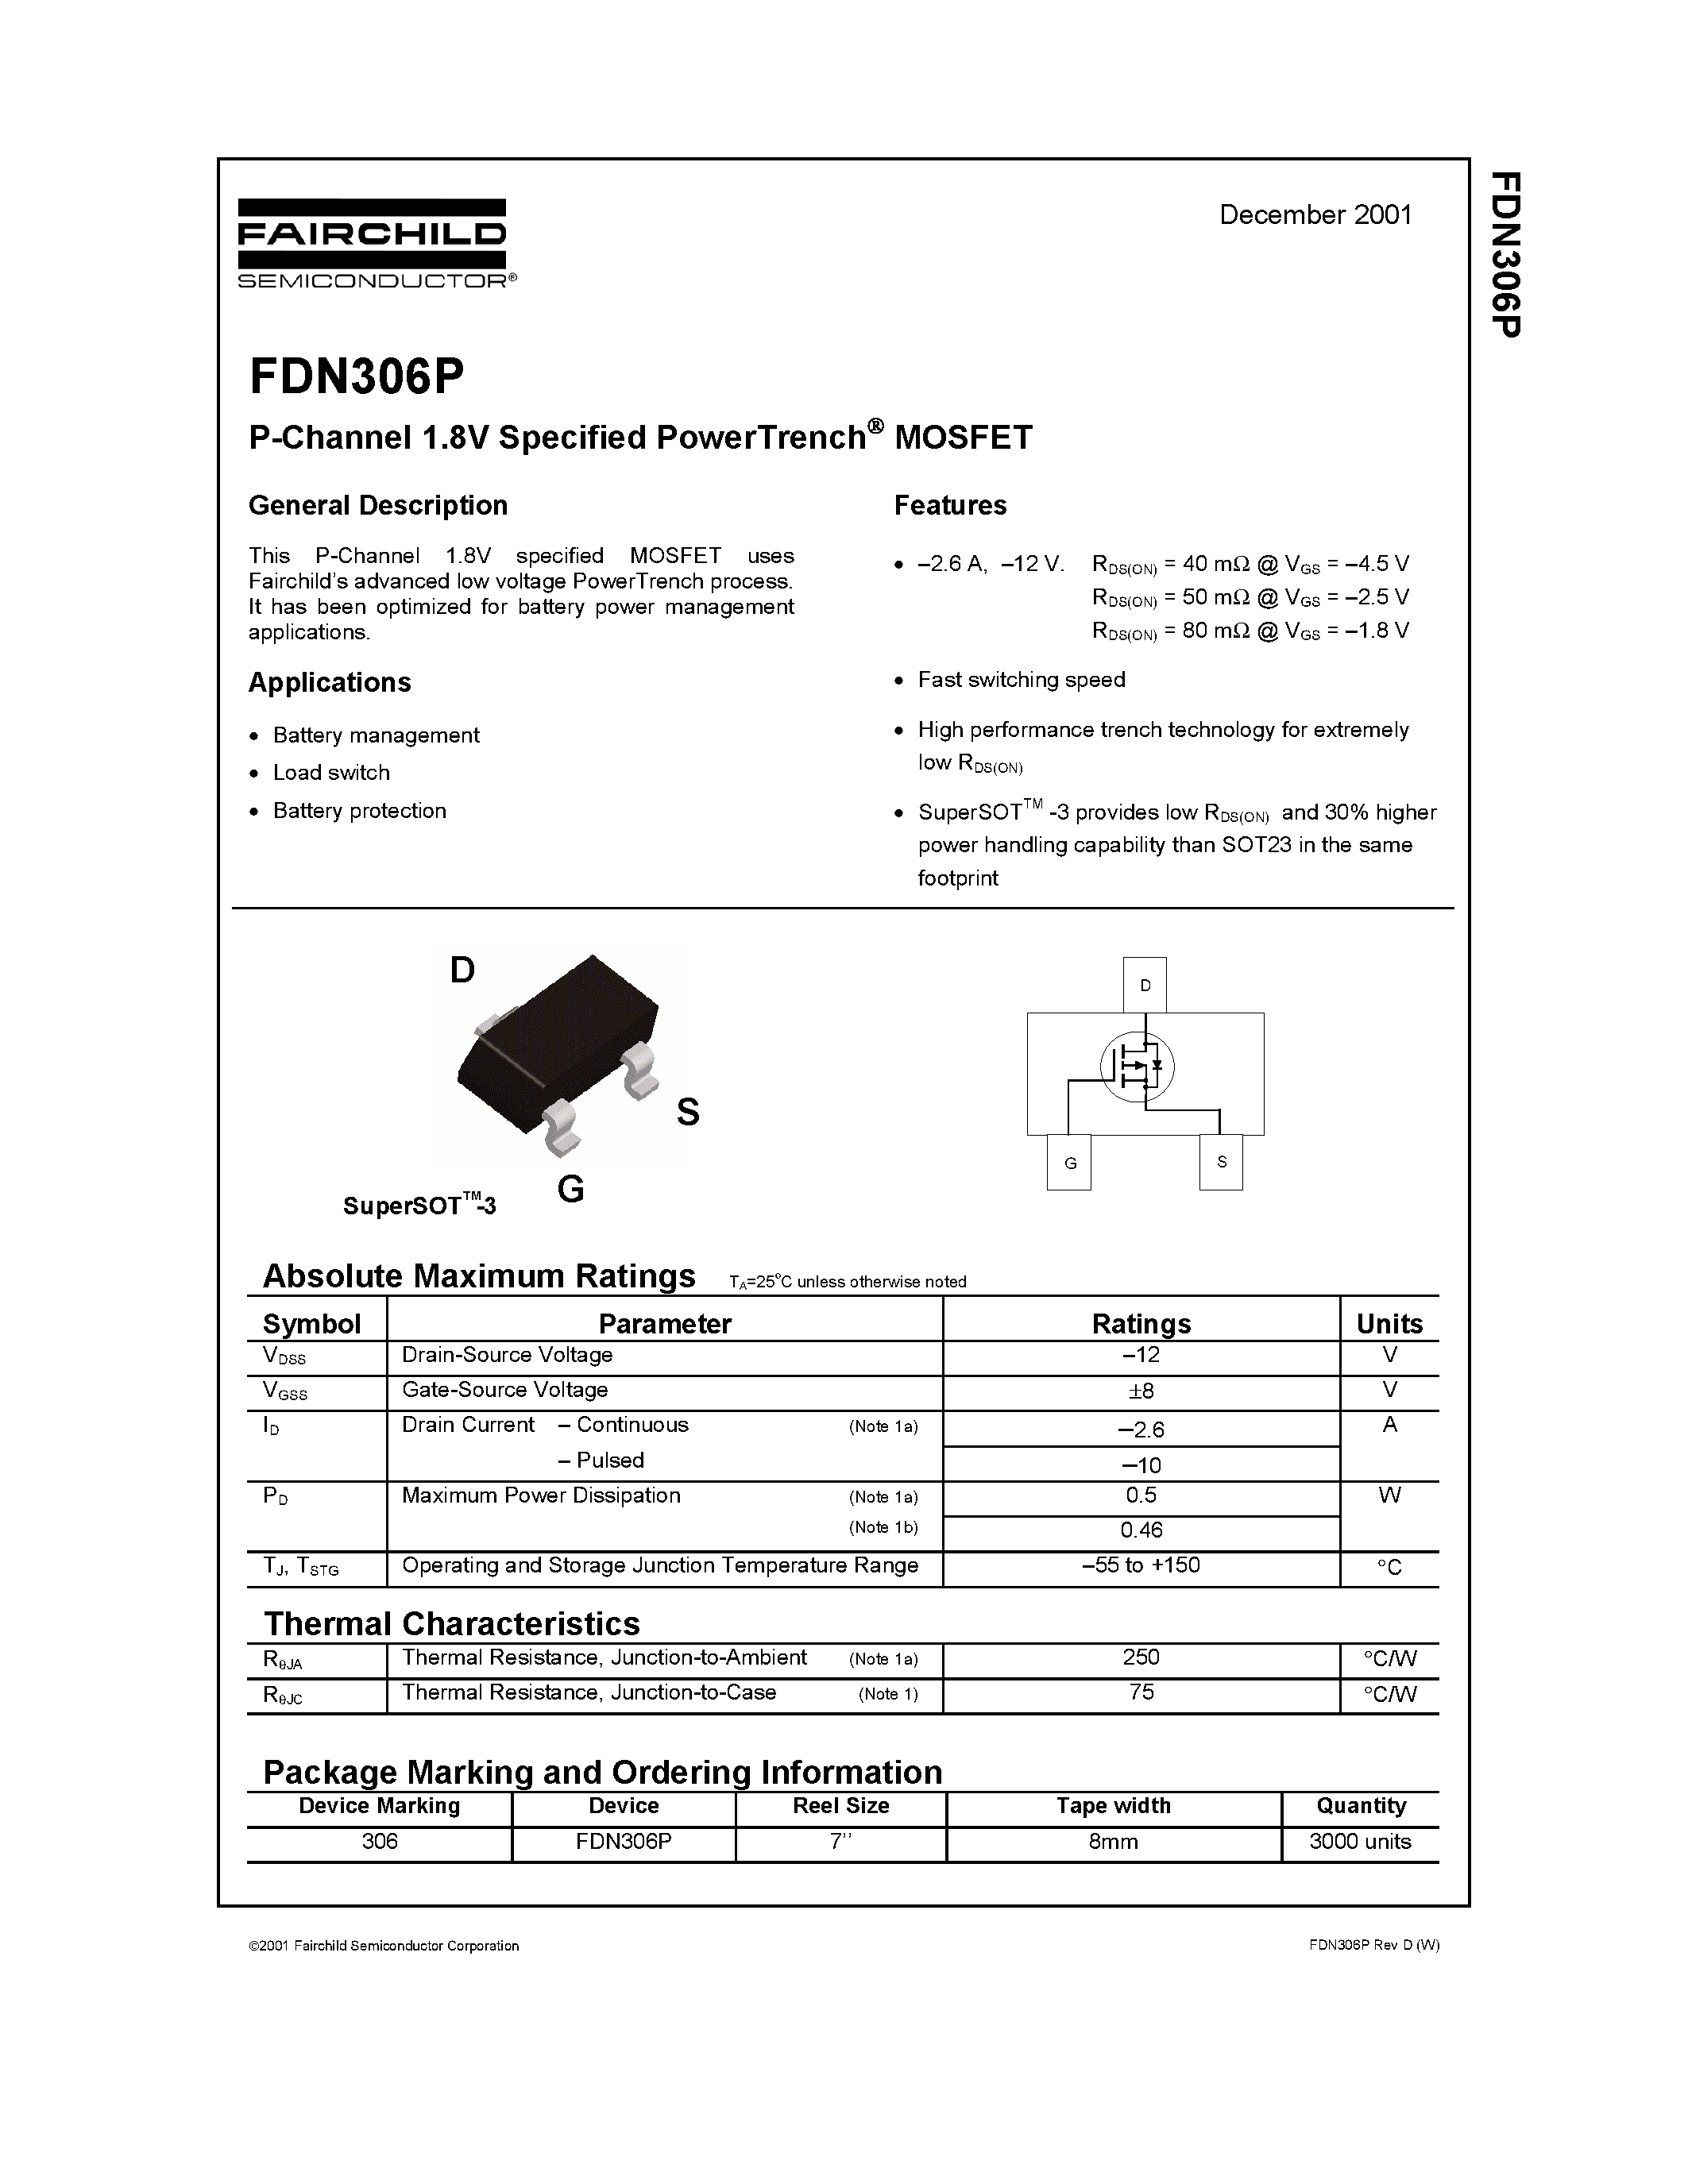 Даташит FDN306P-P-Channel 1.8V Specified PowerTrench MOSFET страница 1